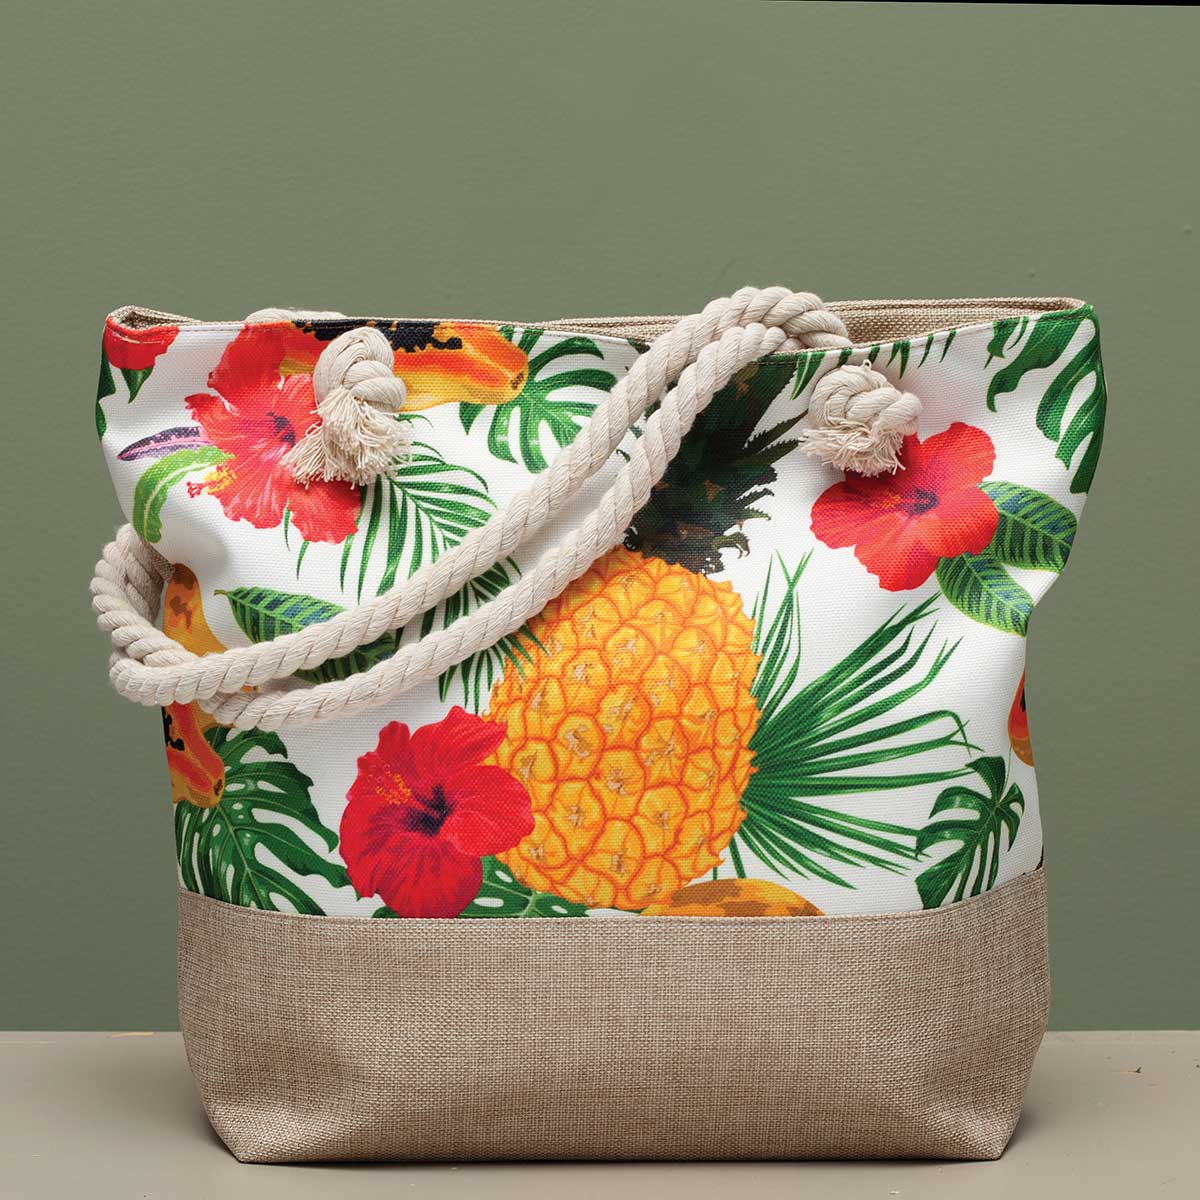 Pineapple and Hibiscus Tapestry Bag 17.5"x5"x14" with 10" Should